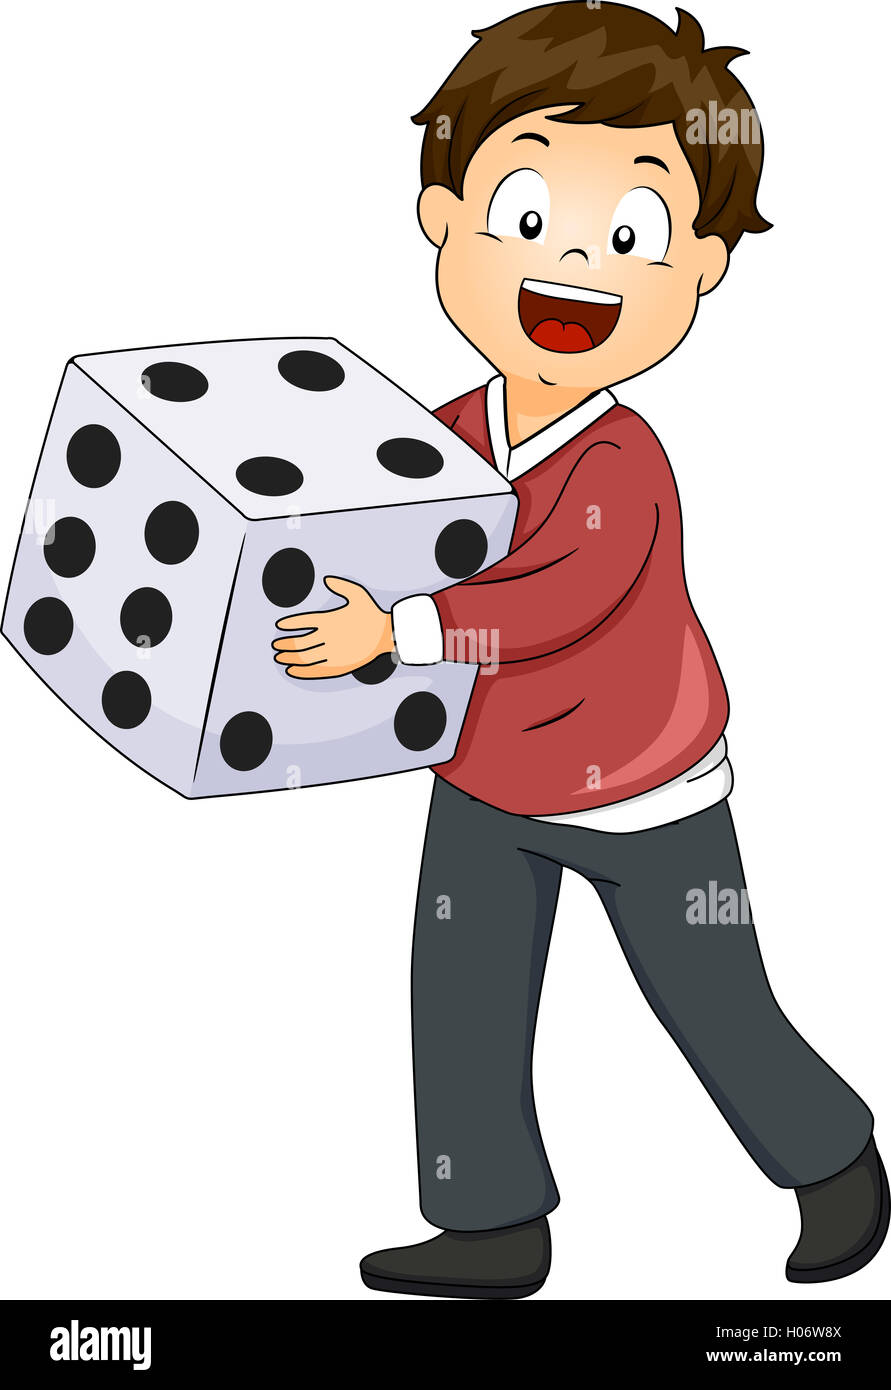 Illustration of a Little Boy Rolling a Giant Die Stock Photo - Alamy